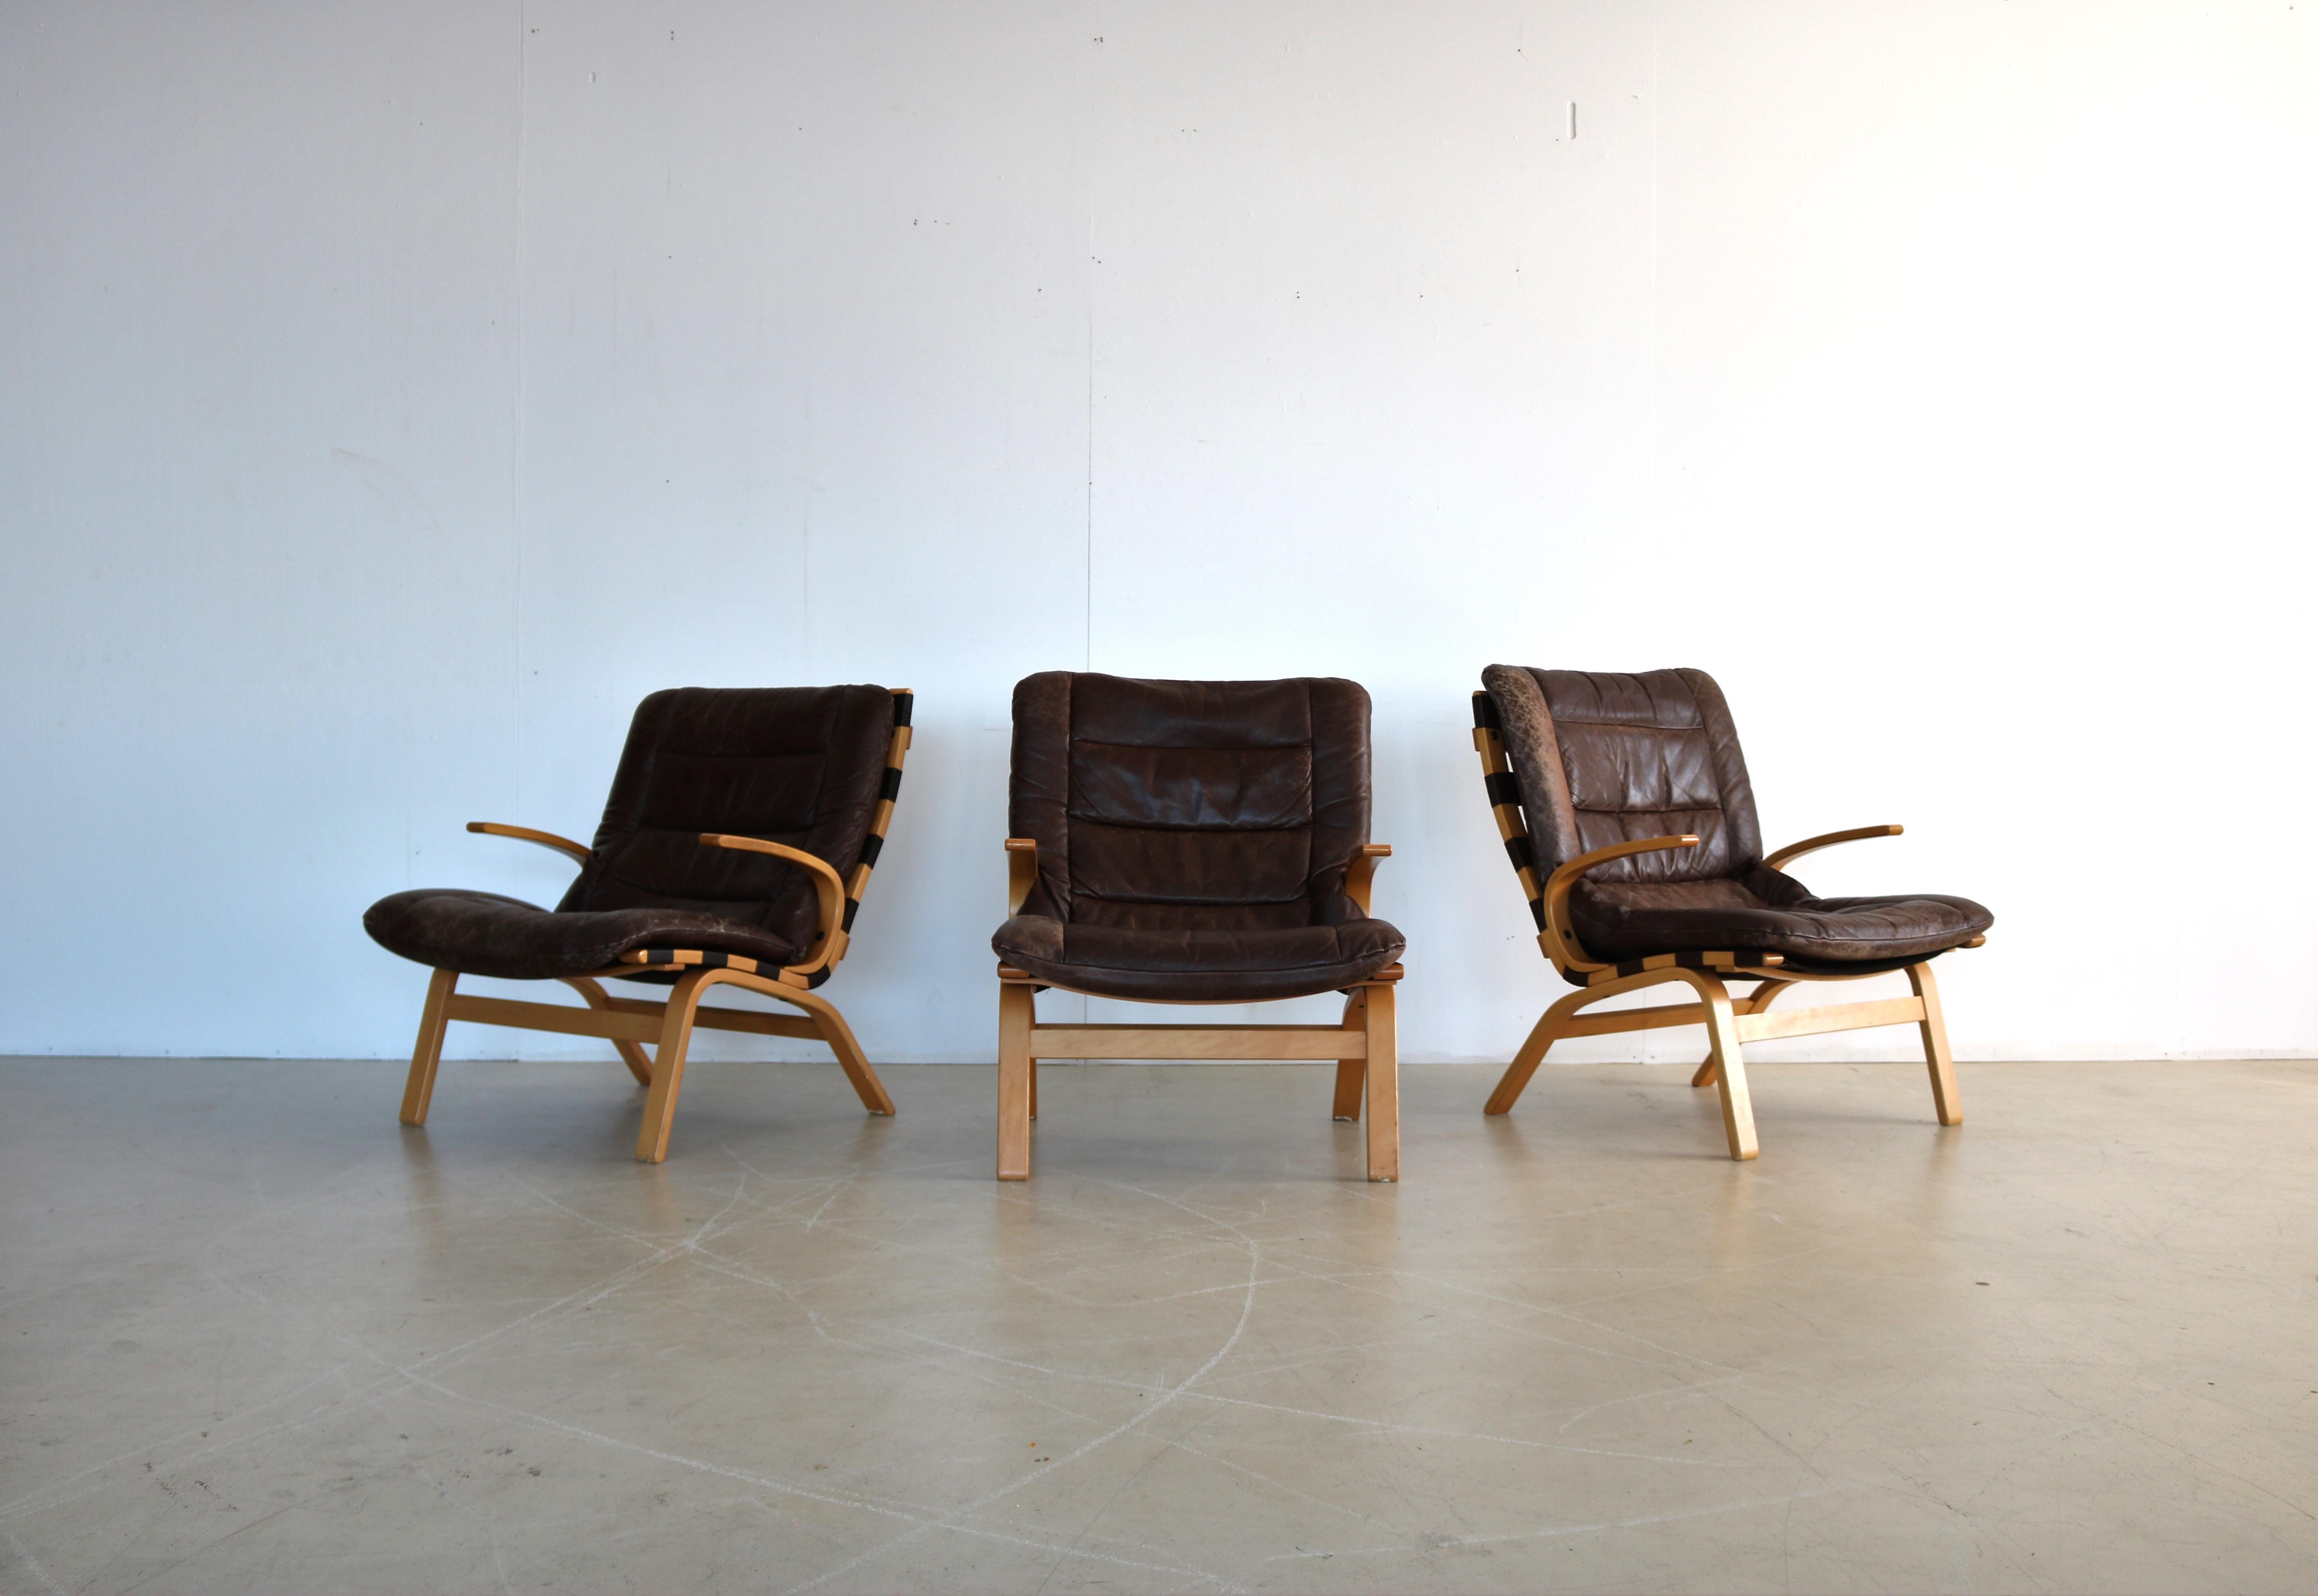 Vintage Armchairs  hove mobler  skyline chair  Danish

period  60's
designs  einar hove  hove mobler  skyline  Denmark
conditions  good  light signs of use
size  80 x 64 x 80 (hxwxd) seat height 45 cm.

Details  rosewood; leather; 3 available; price